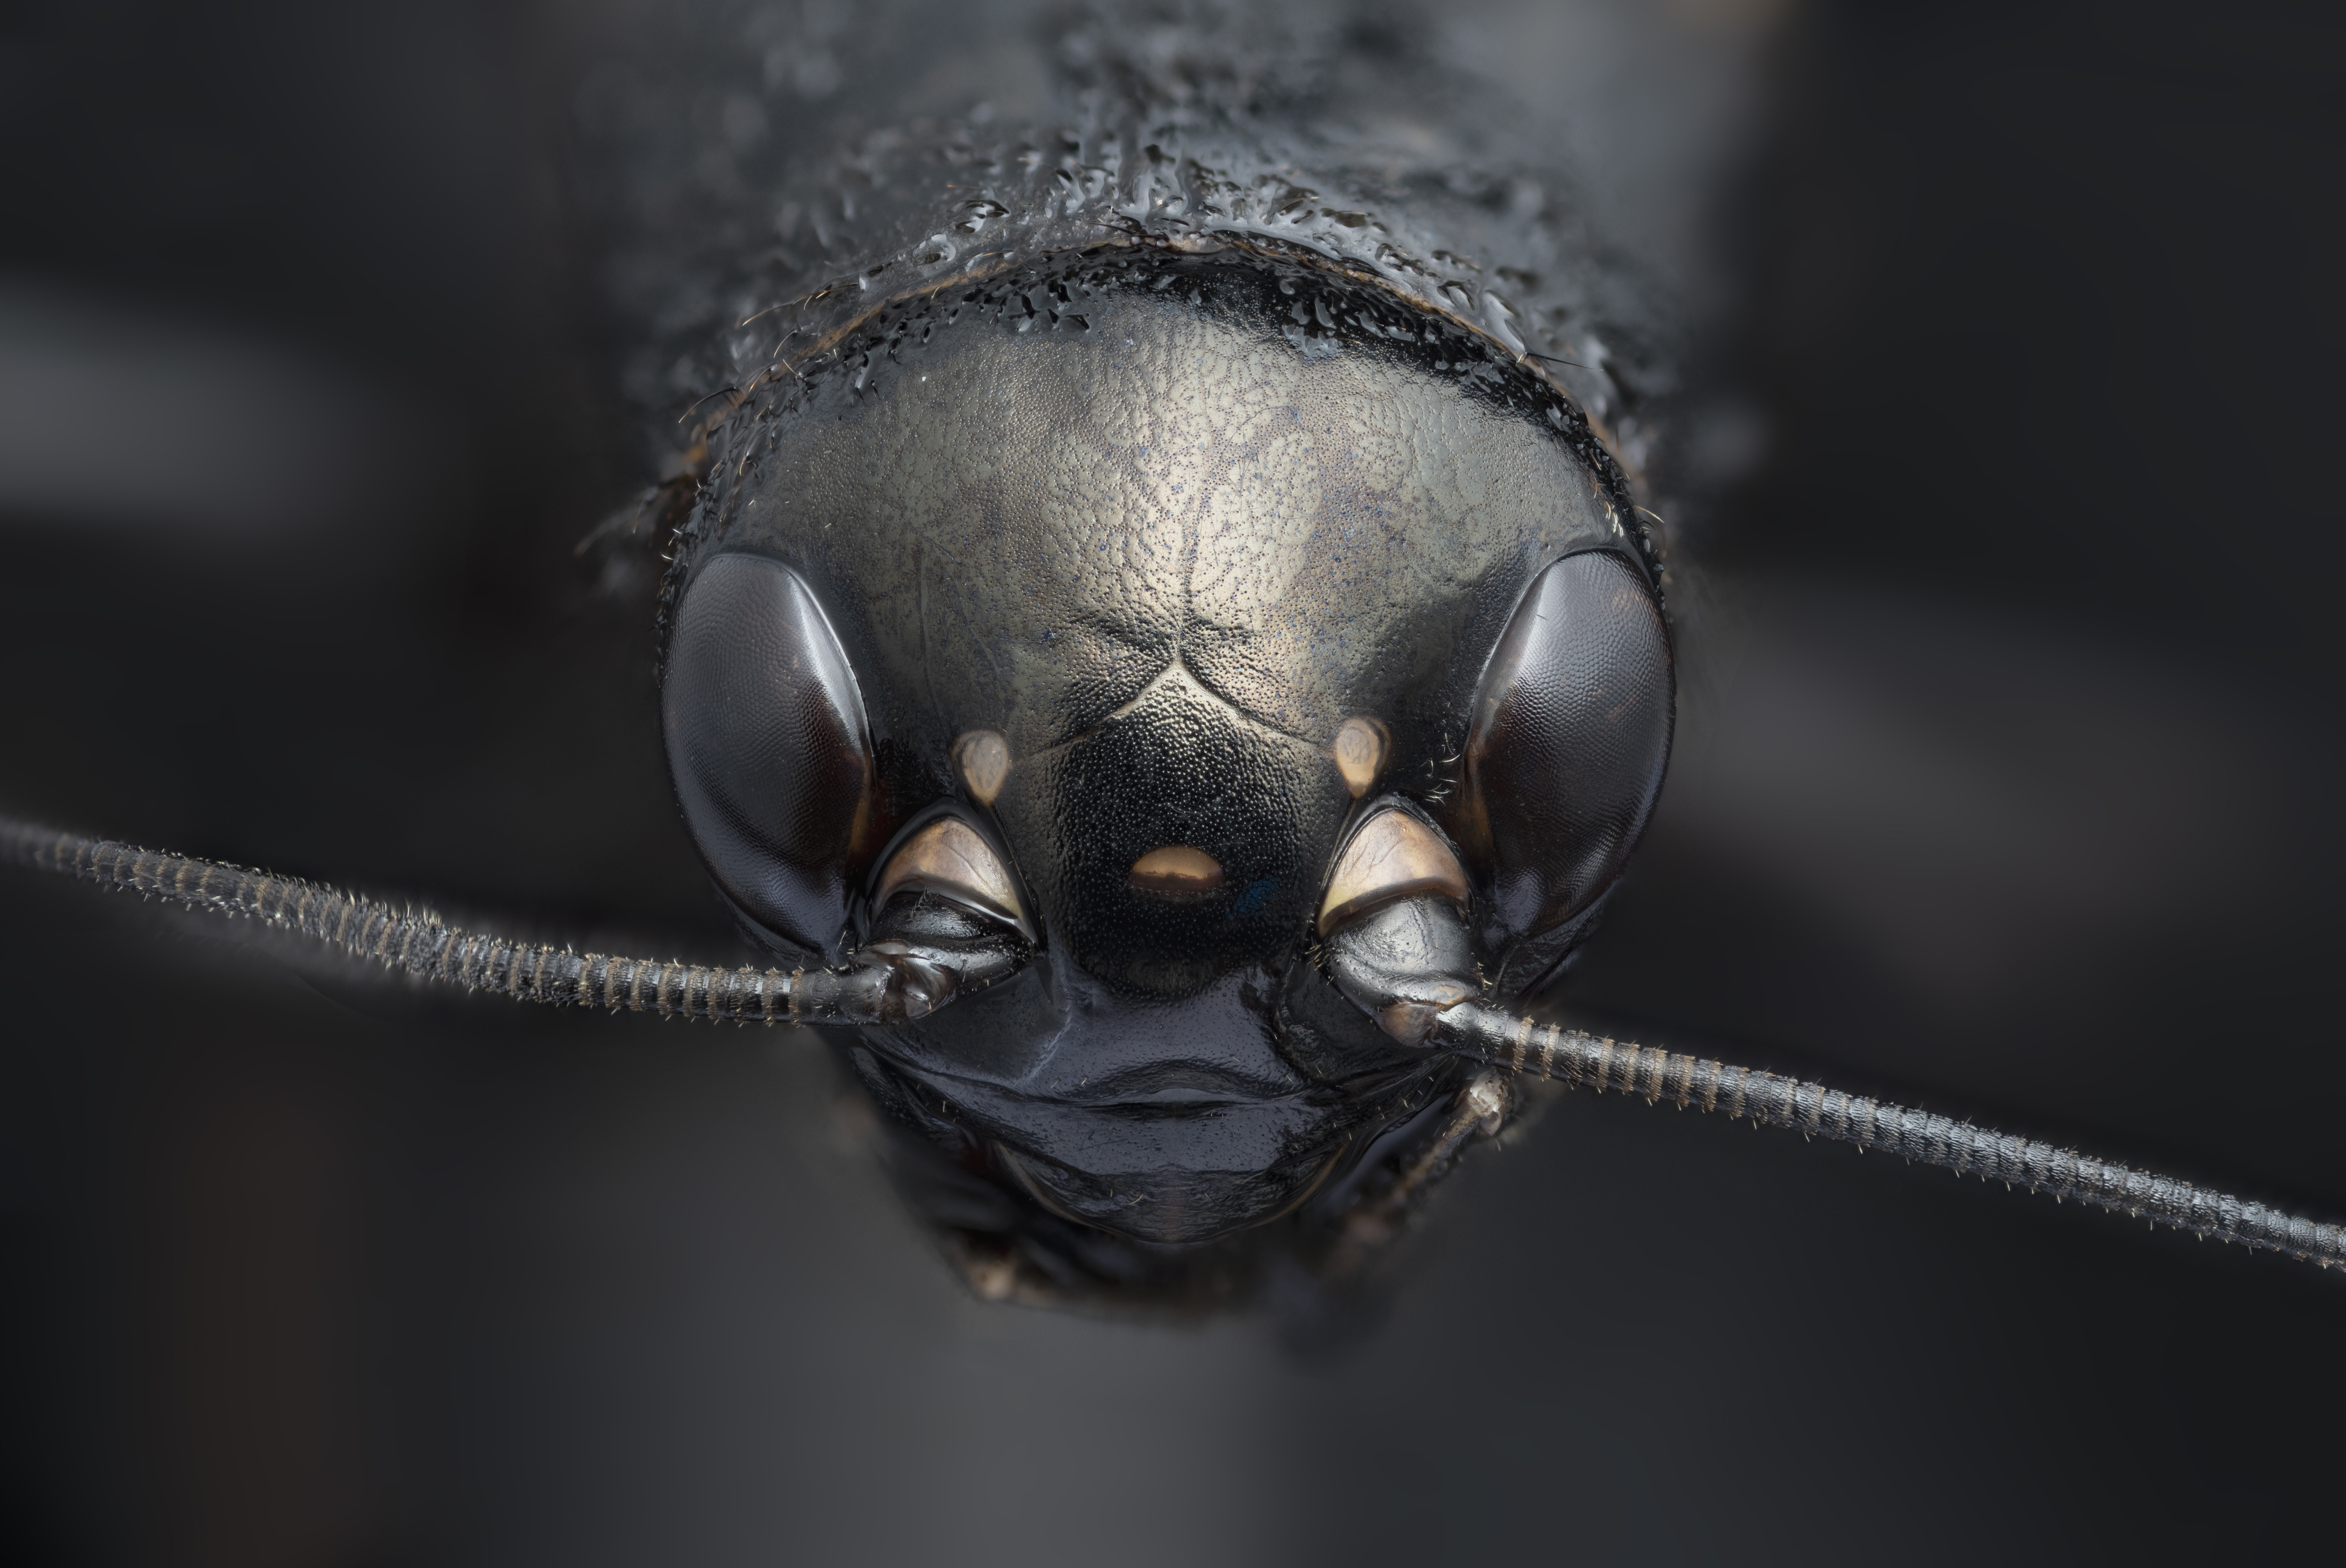 Close up of head and face of a cricket. Shiny black, large compound eyes, segmented antennae attached between eyes, leather-like texture of head plate.